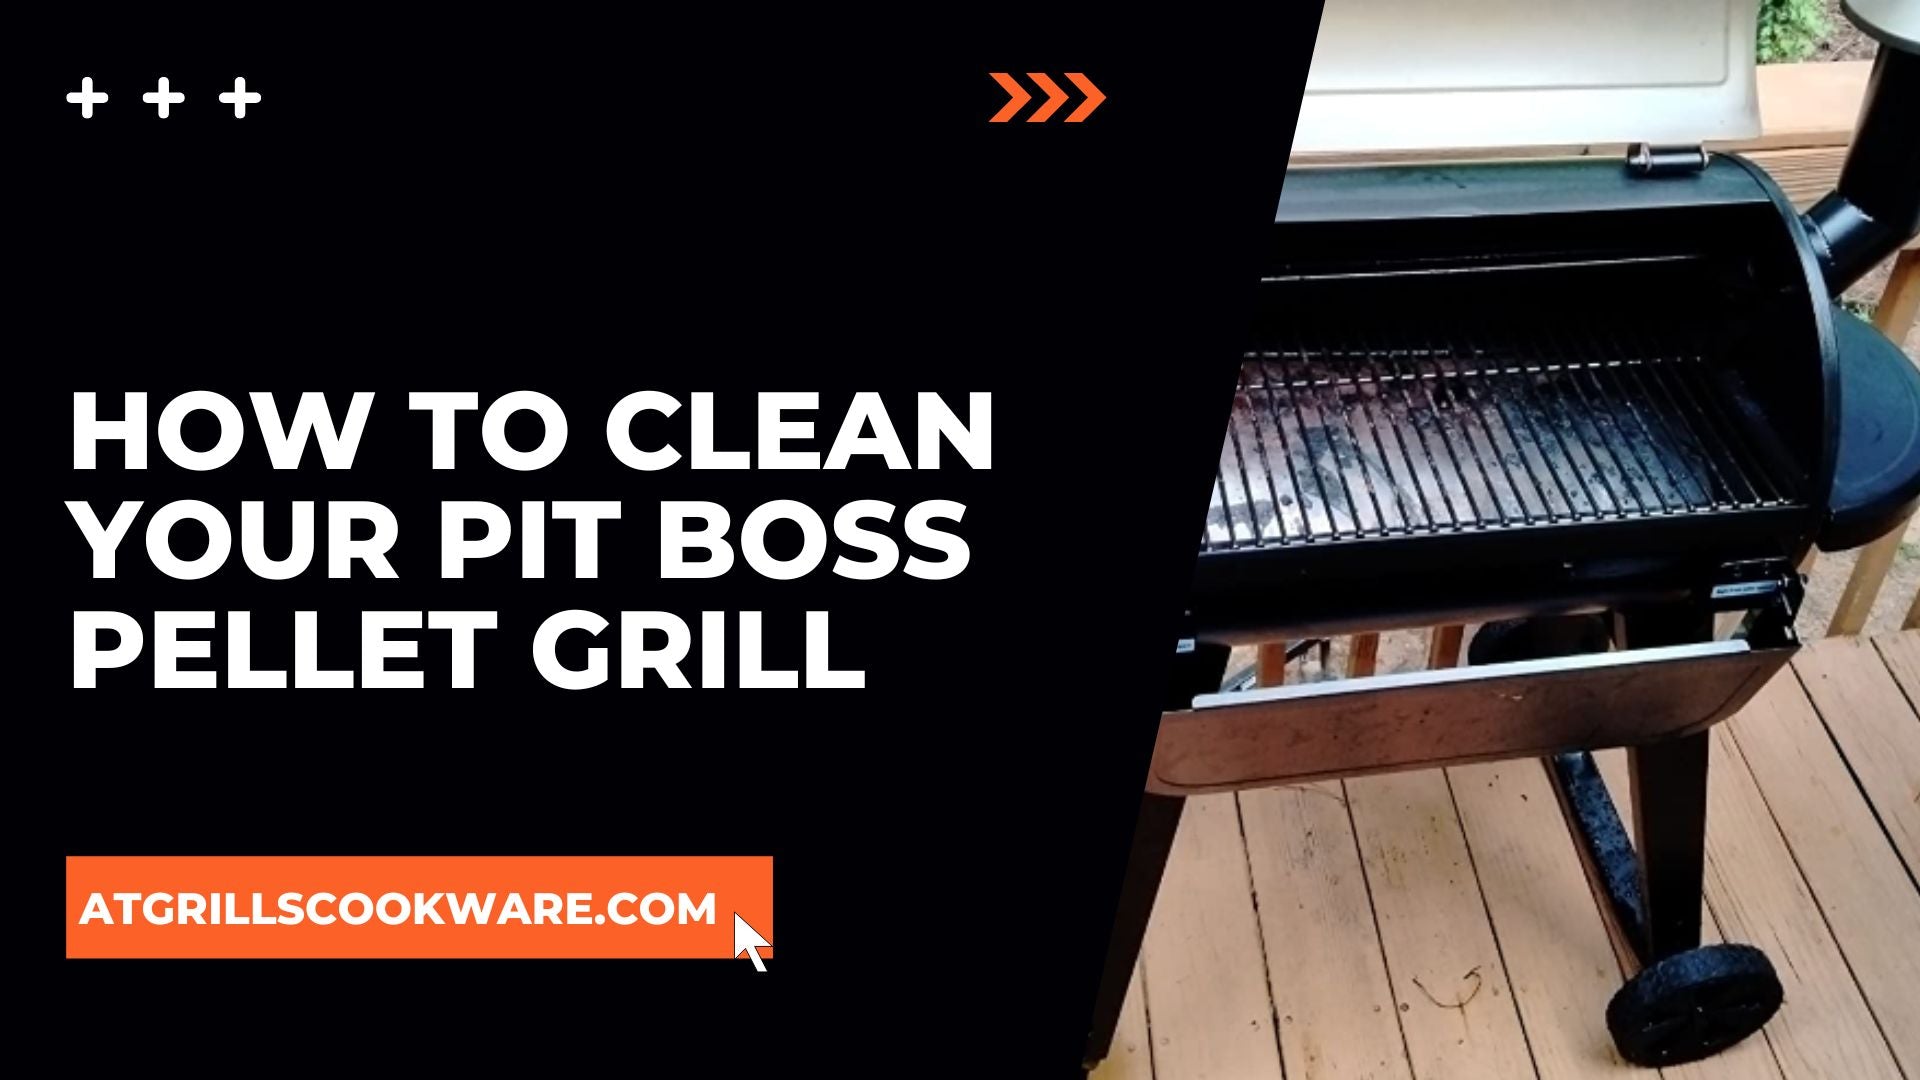 How to Clean Your Pit Boss Pellet Grill